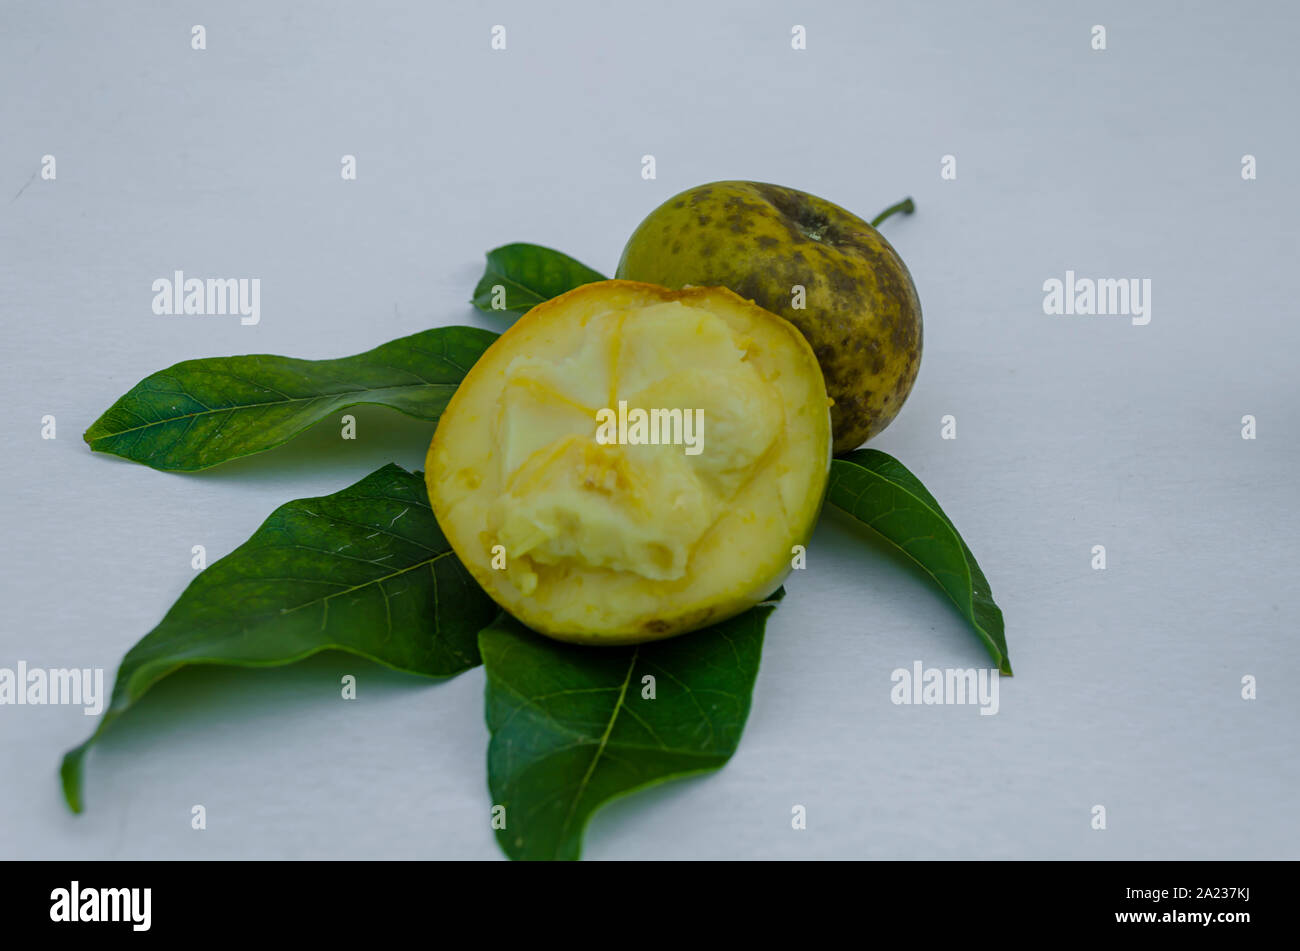 White Sapote Fruits And Leaves Stock Photo